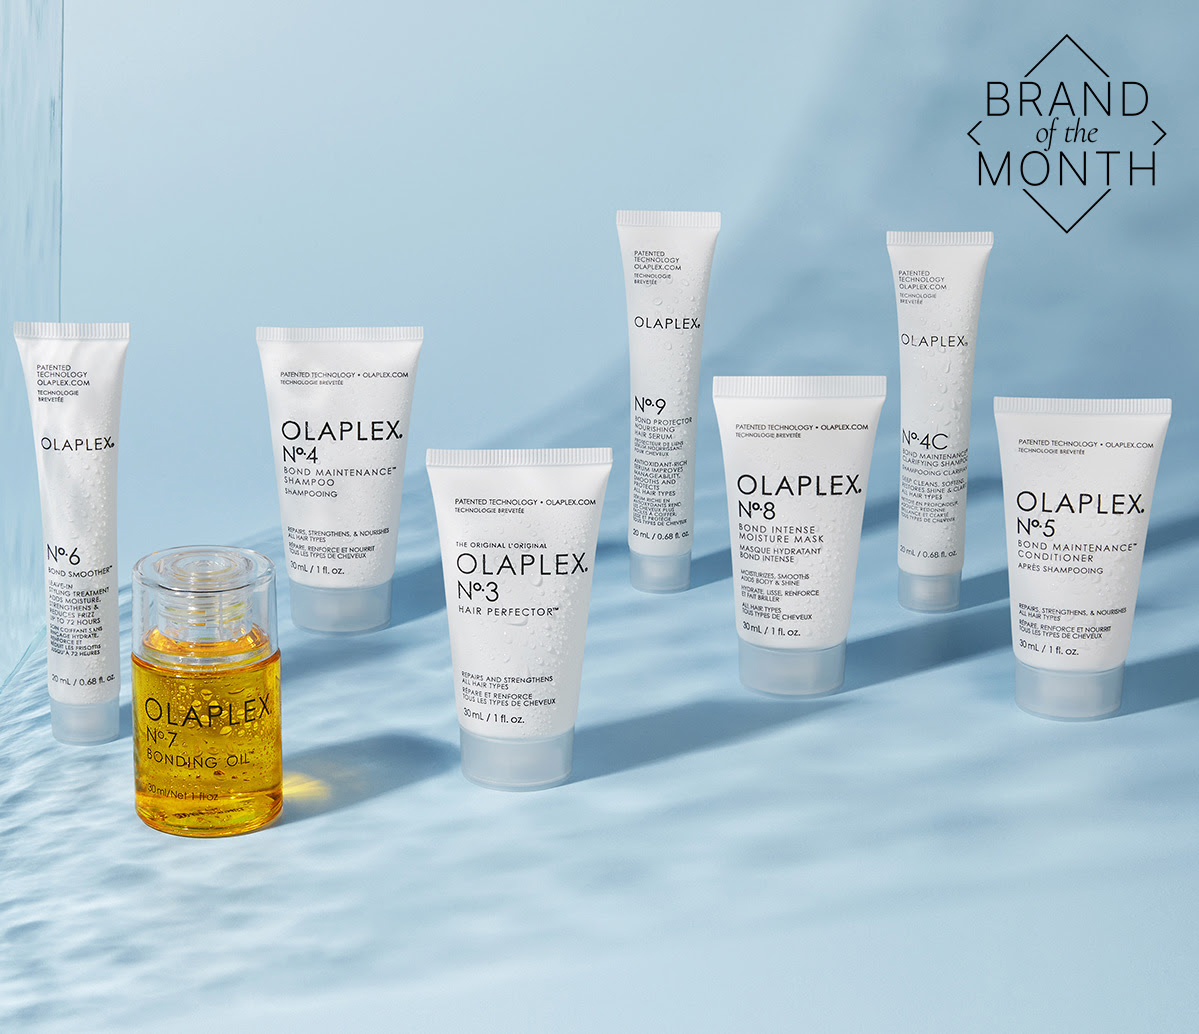 Cult Beauty’s Brand of the month is Olaplex